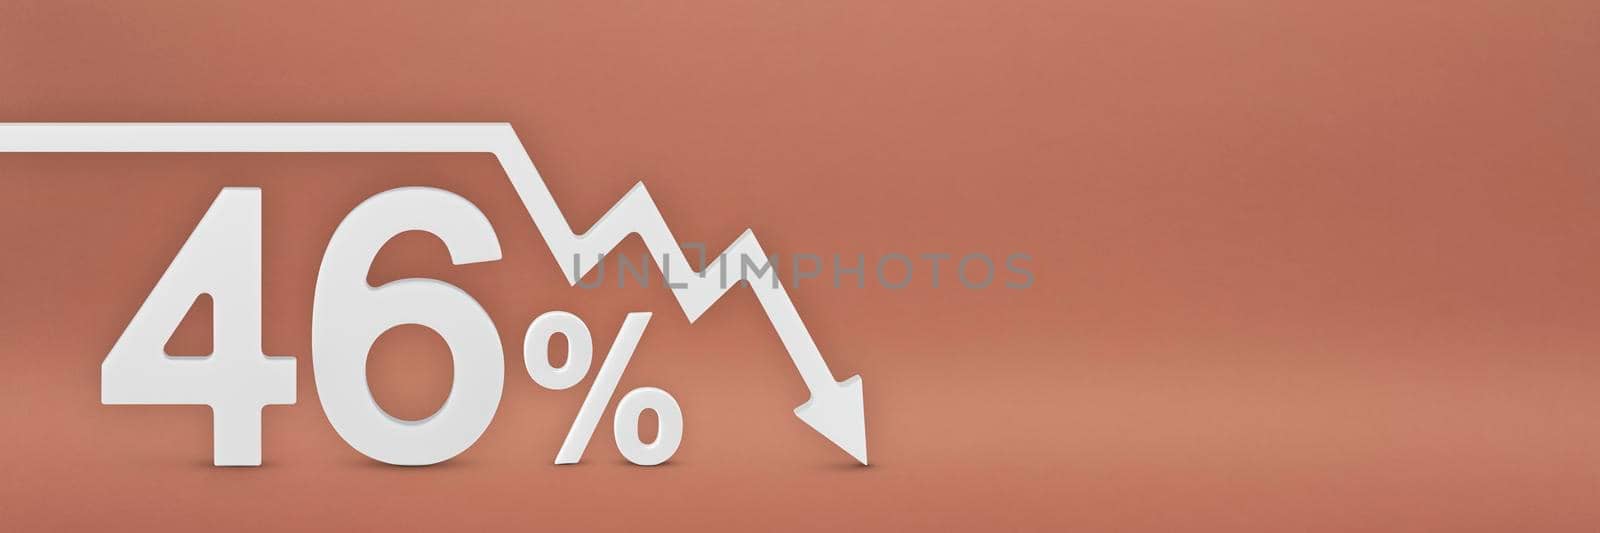 forty-six percent, the arrow on the graph is pointing down. Stock market crash, bear market, inflation.Economic collapse, collapse of stocks.3d banner,46 percent discount sign on a red background. by SERSOL